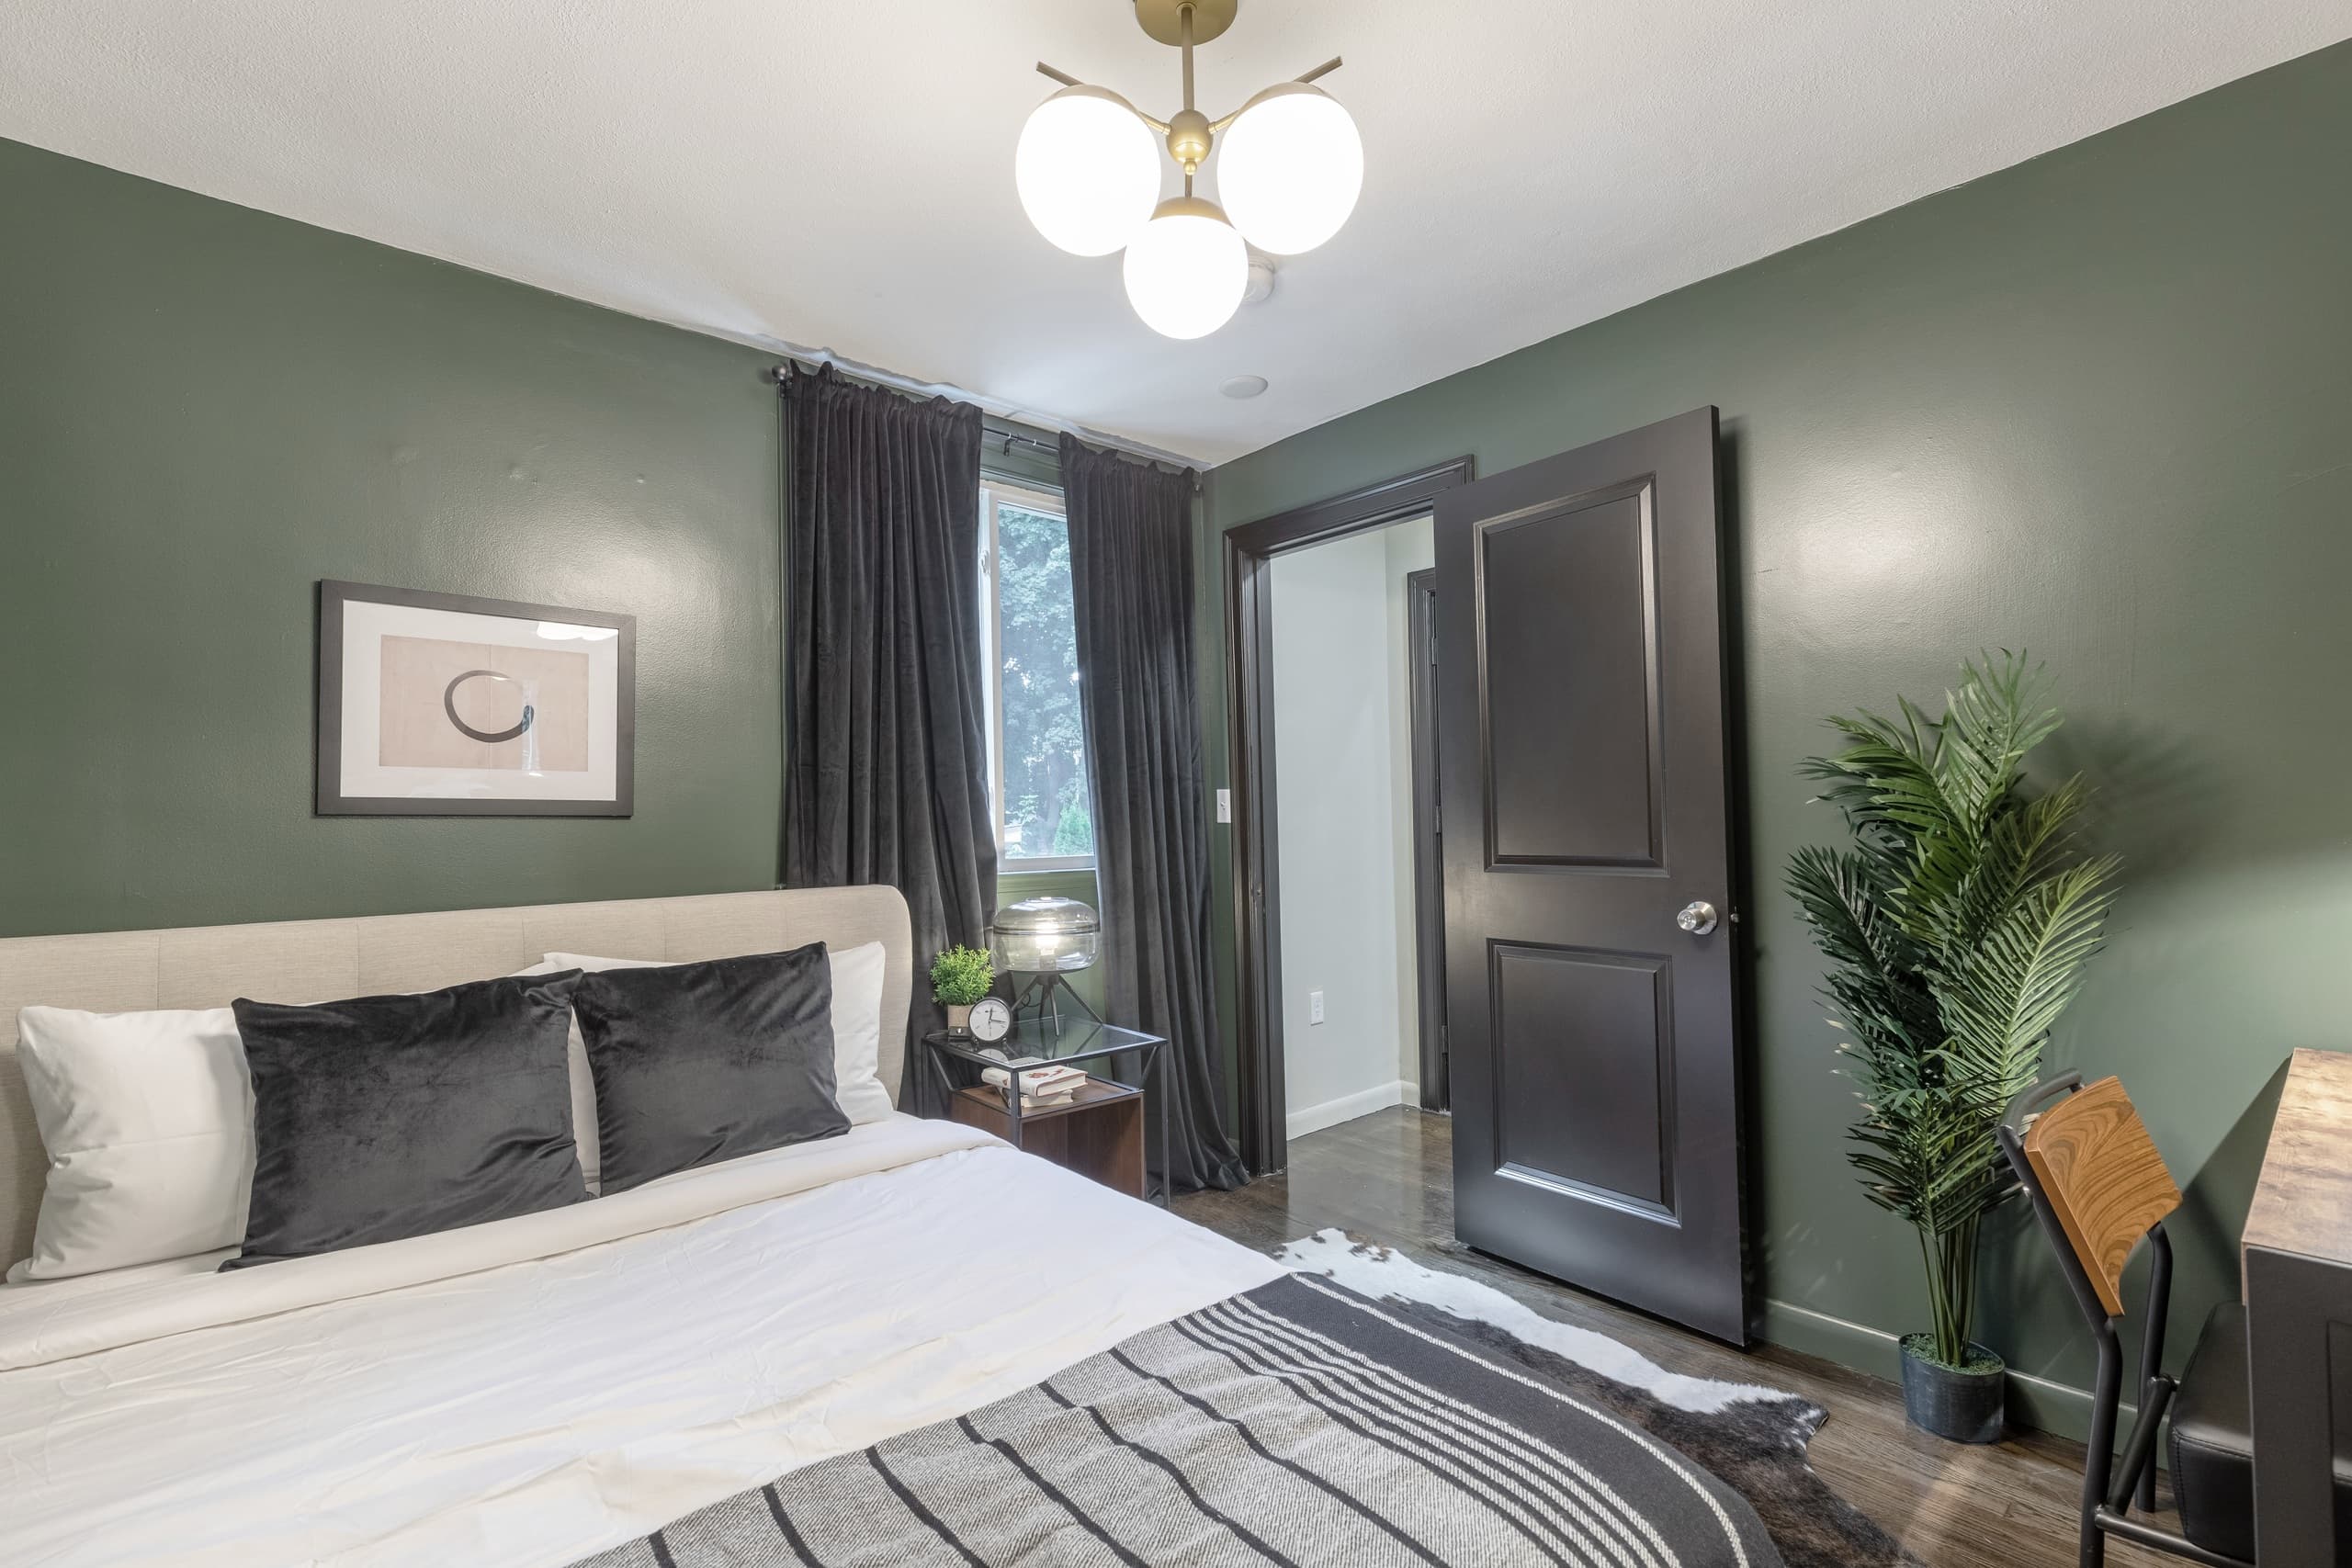 Photo 2 of #428: Queen Bedroom A at June Homes